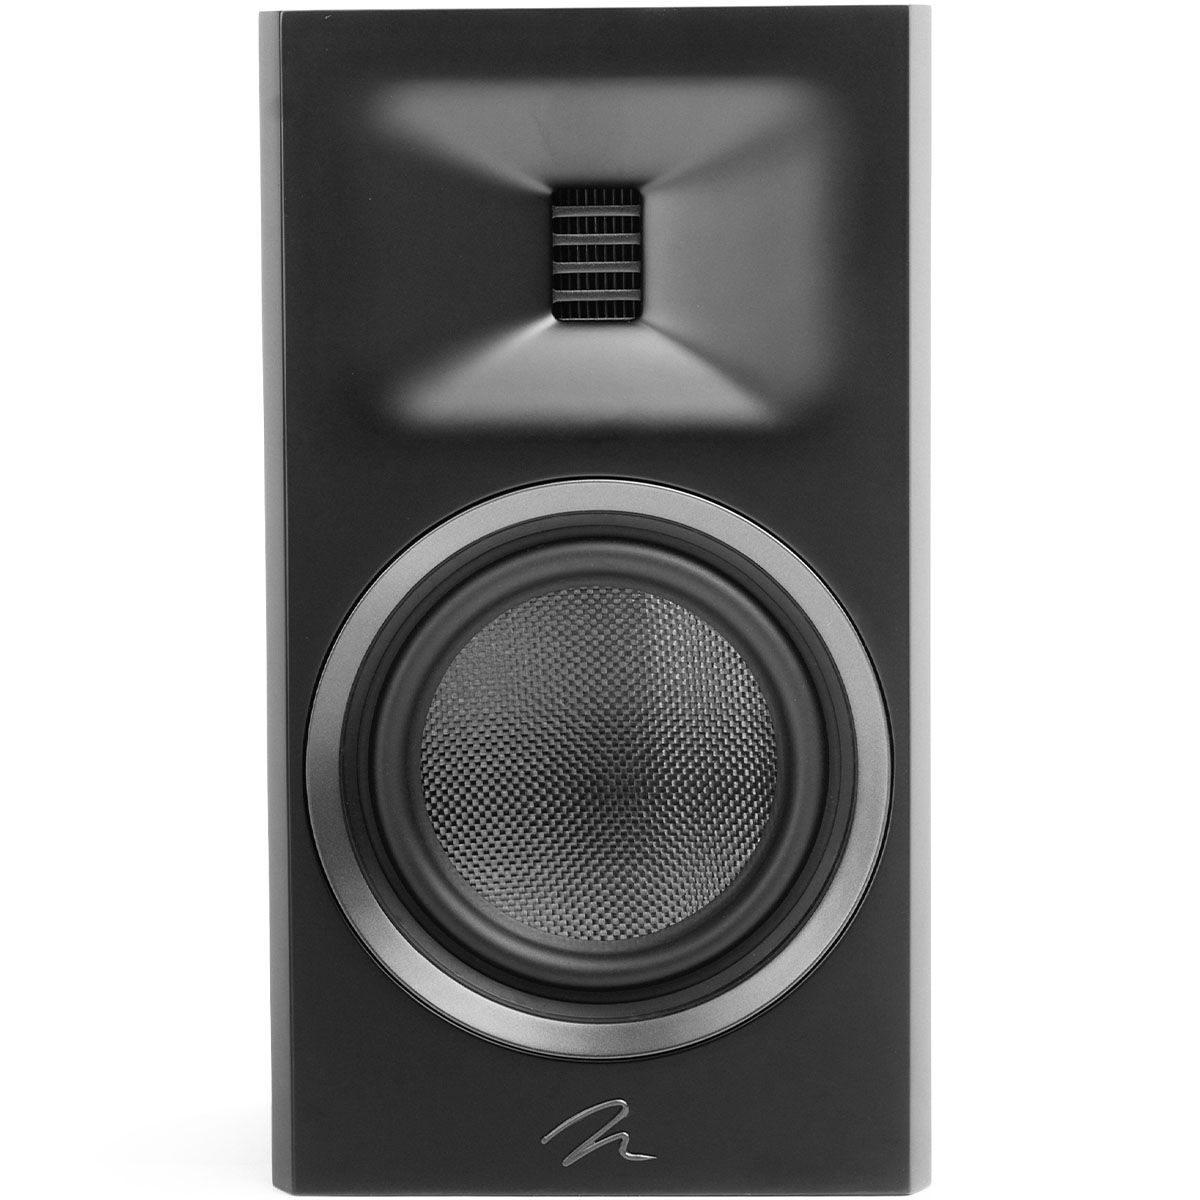 MartinLogan Motion XT B10  Bookshelf Speaker in black, front view without grilles on white background